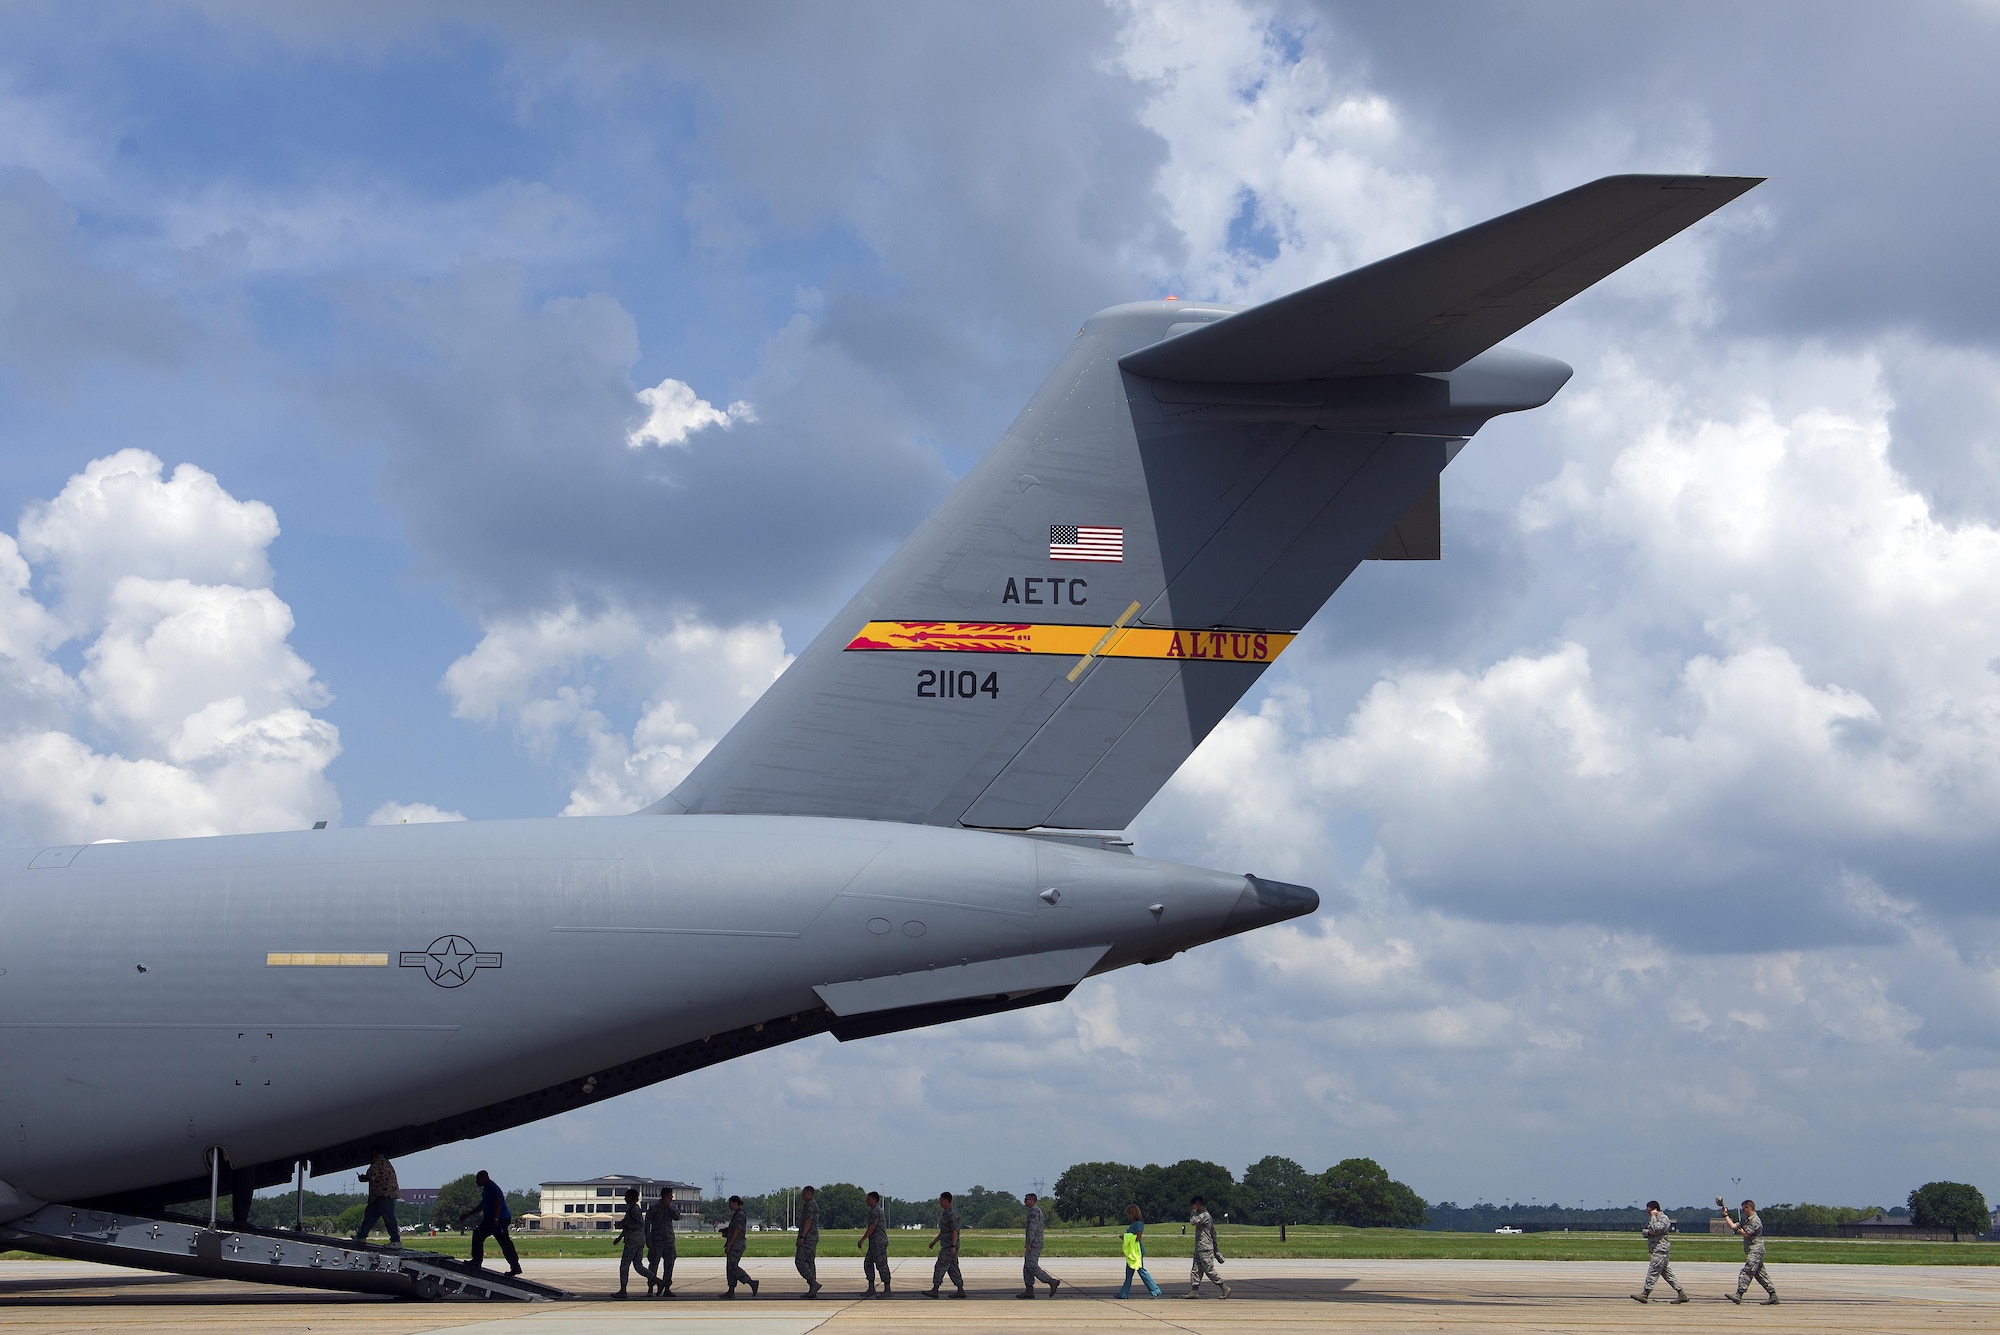 Airmen and civilians assigned to Keesler Air Force Base, Miss., board a C-17 Globemaster III from Altus Air Force Base, Okla., for an incentive flight Aug. 4, 2016, on Keesler Air Force Base, Miss. The incentive flight was part of a weeklong hurricane exercise to prepare Keesler for the current hurricane season. (U.S. Air Force photo by Senior Airman Duncan McElroy/Released)